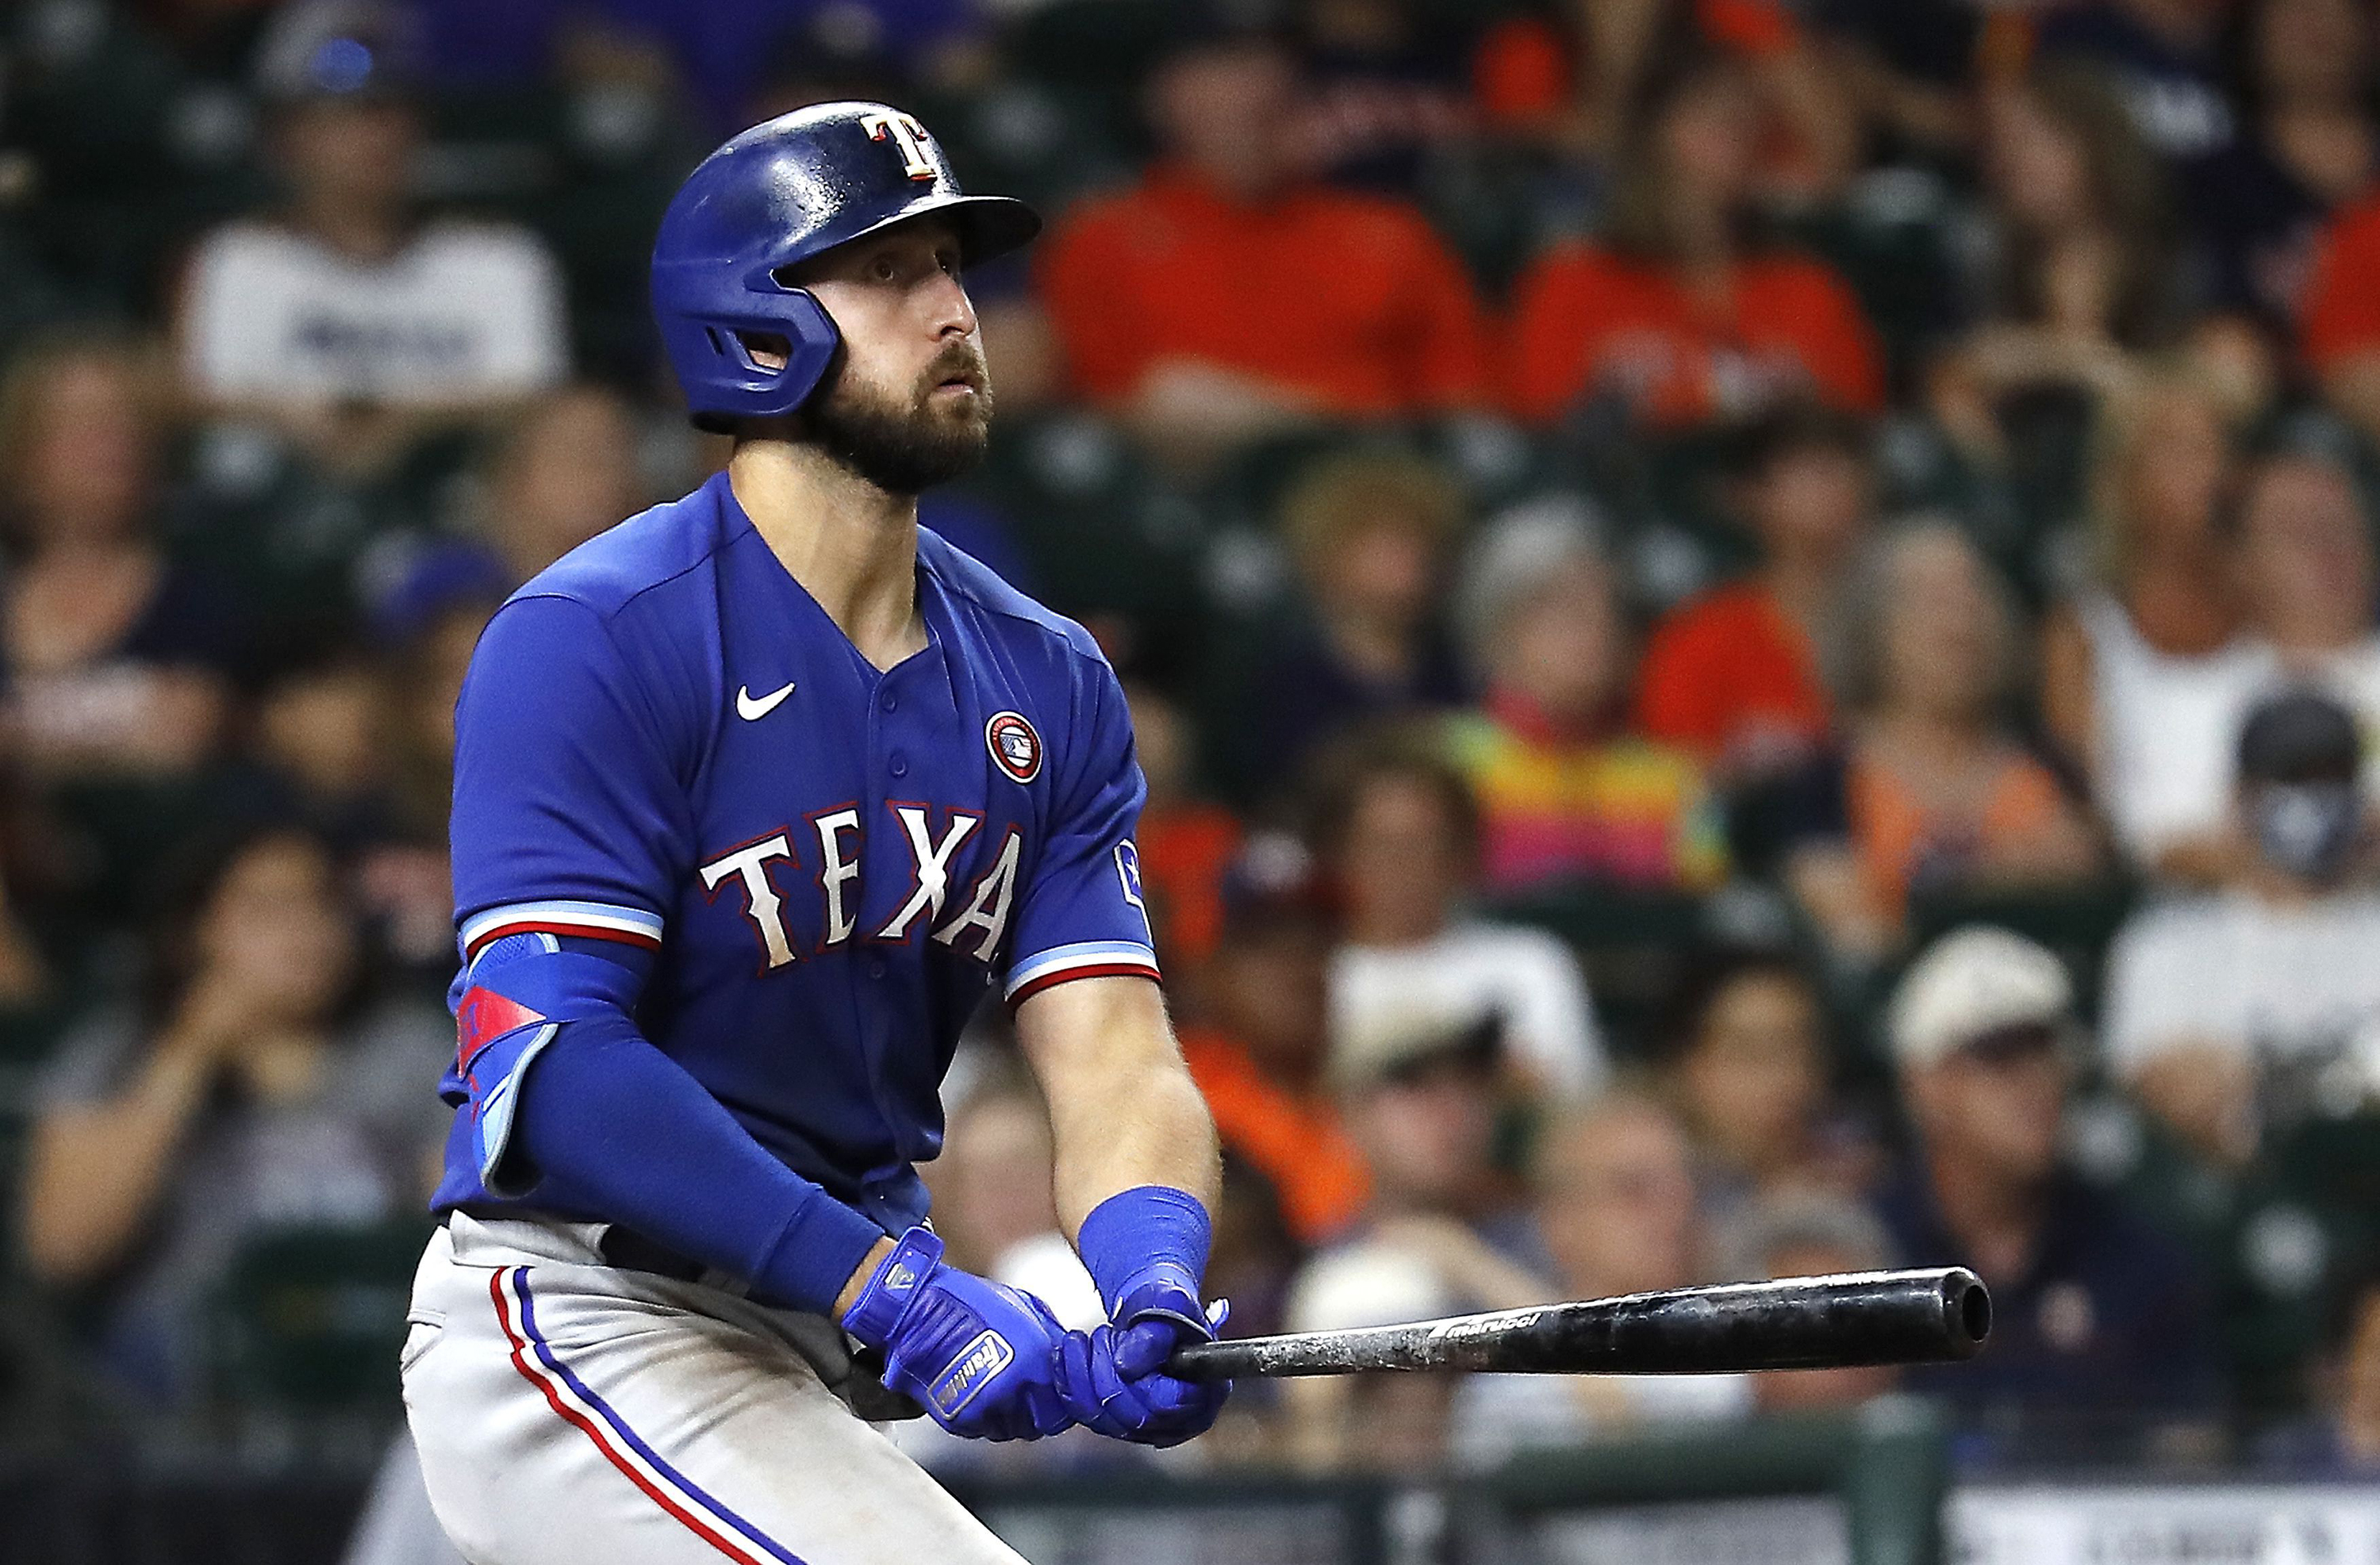 The Show 19 - Joey Gallo